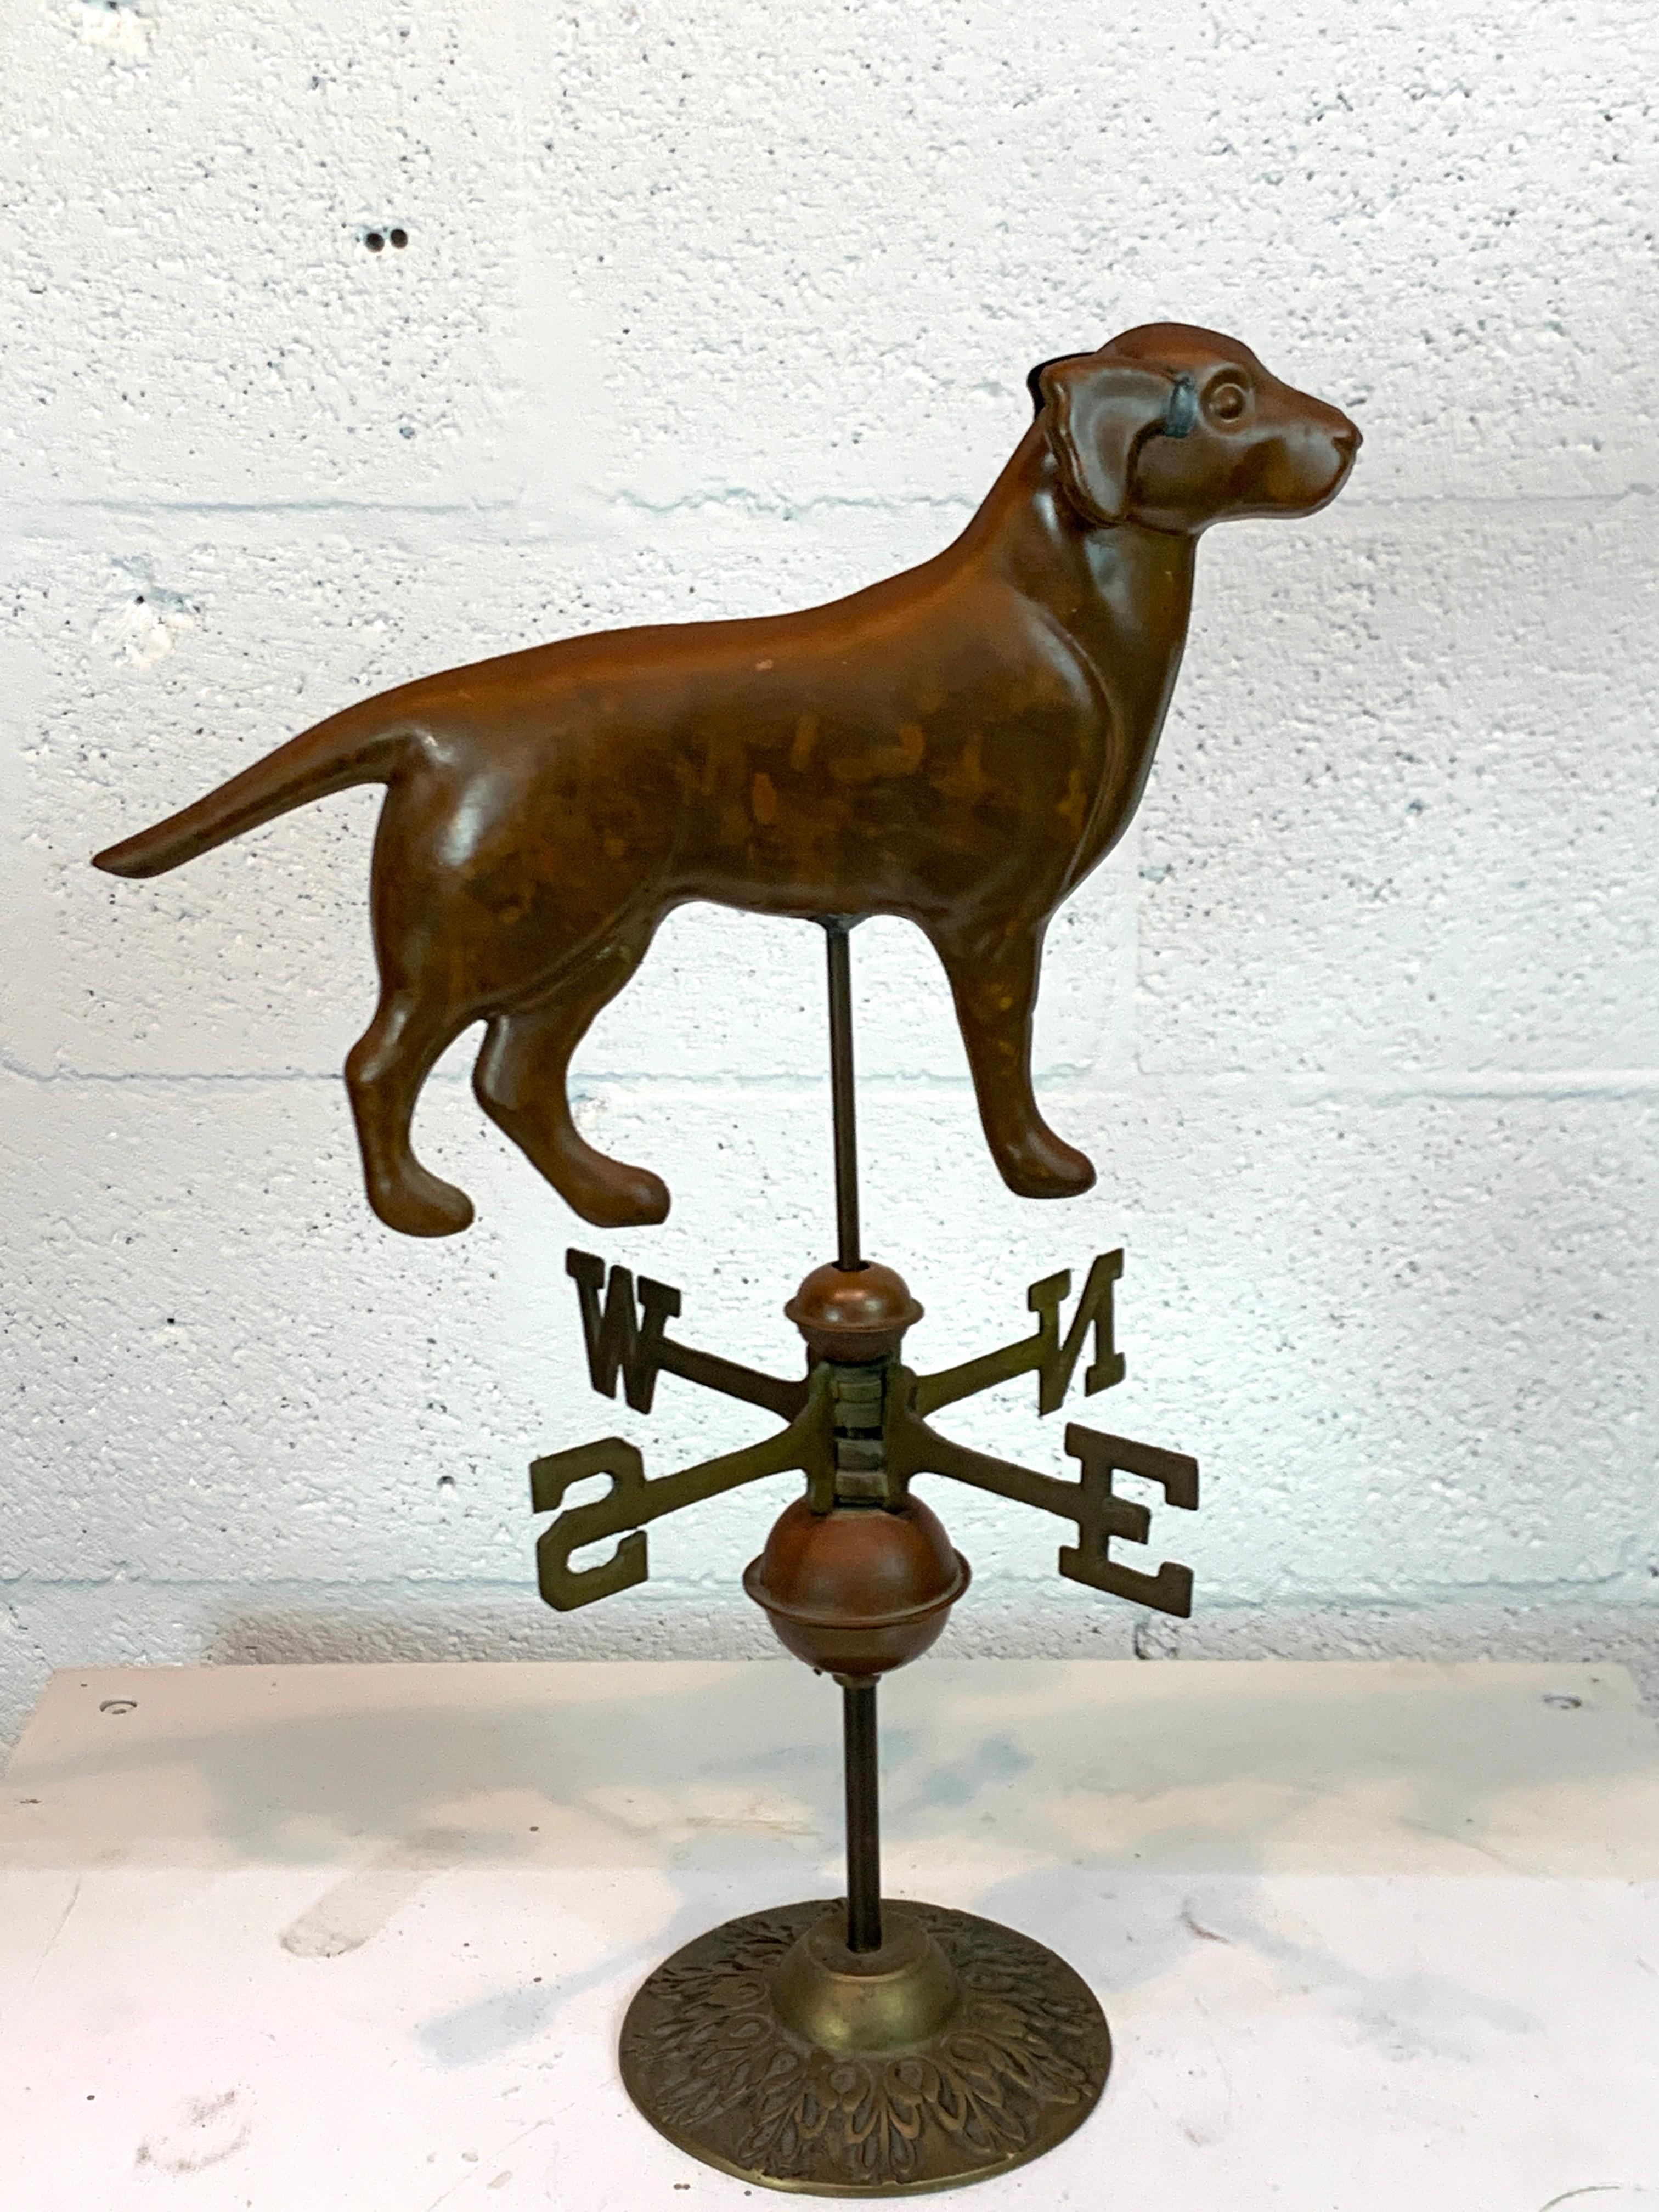 Vintage copper and brass tabletop model of a weathervane, well made, beautiful patina, moveable.
The dog alone measures: 13